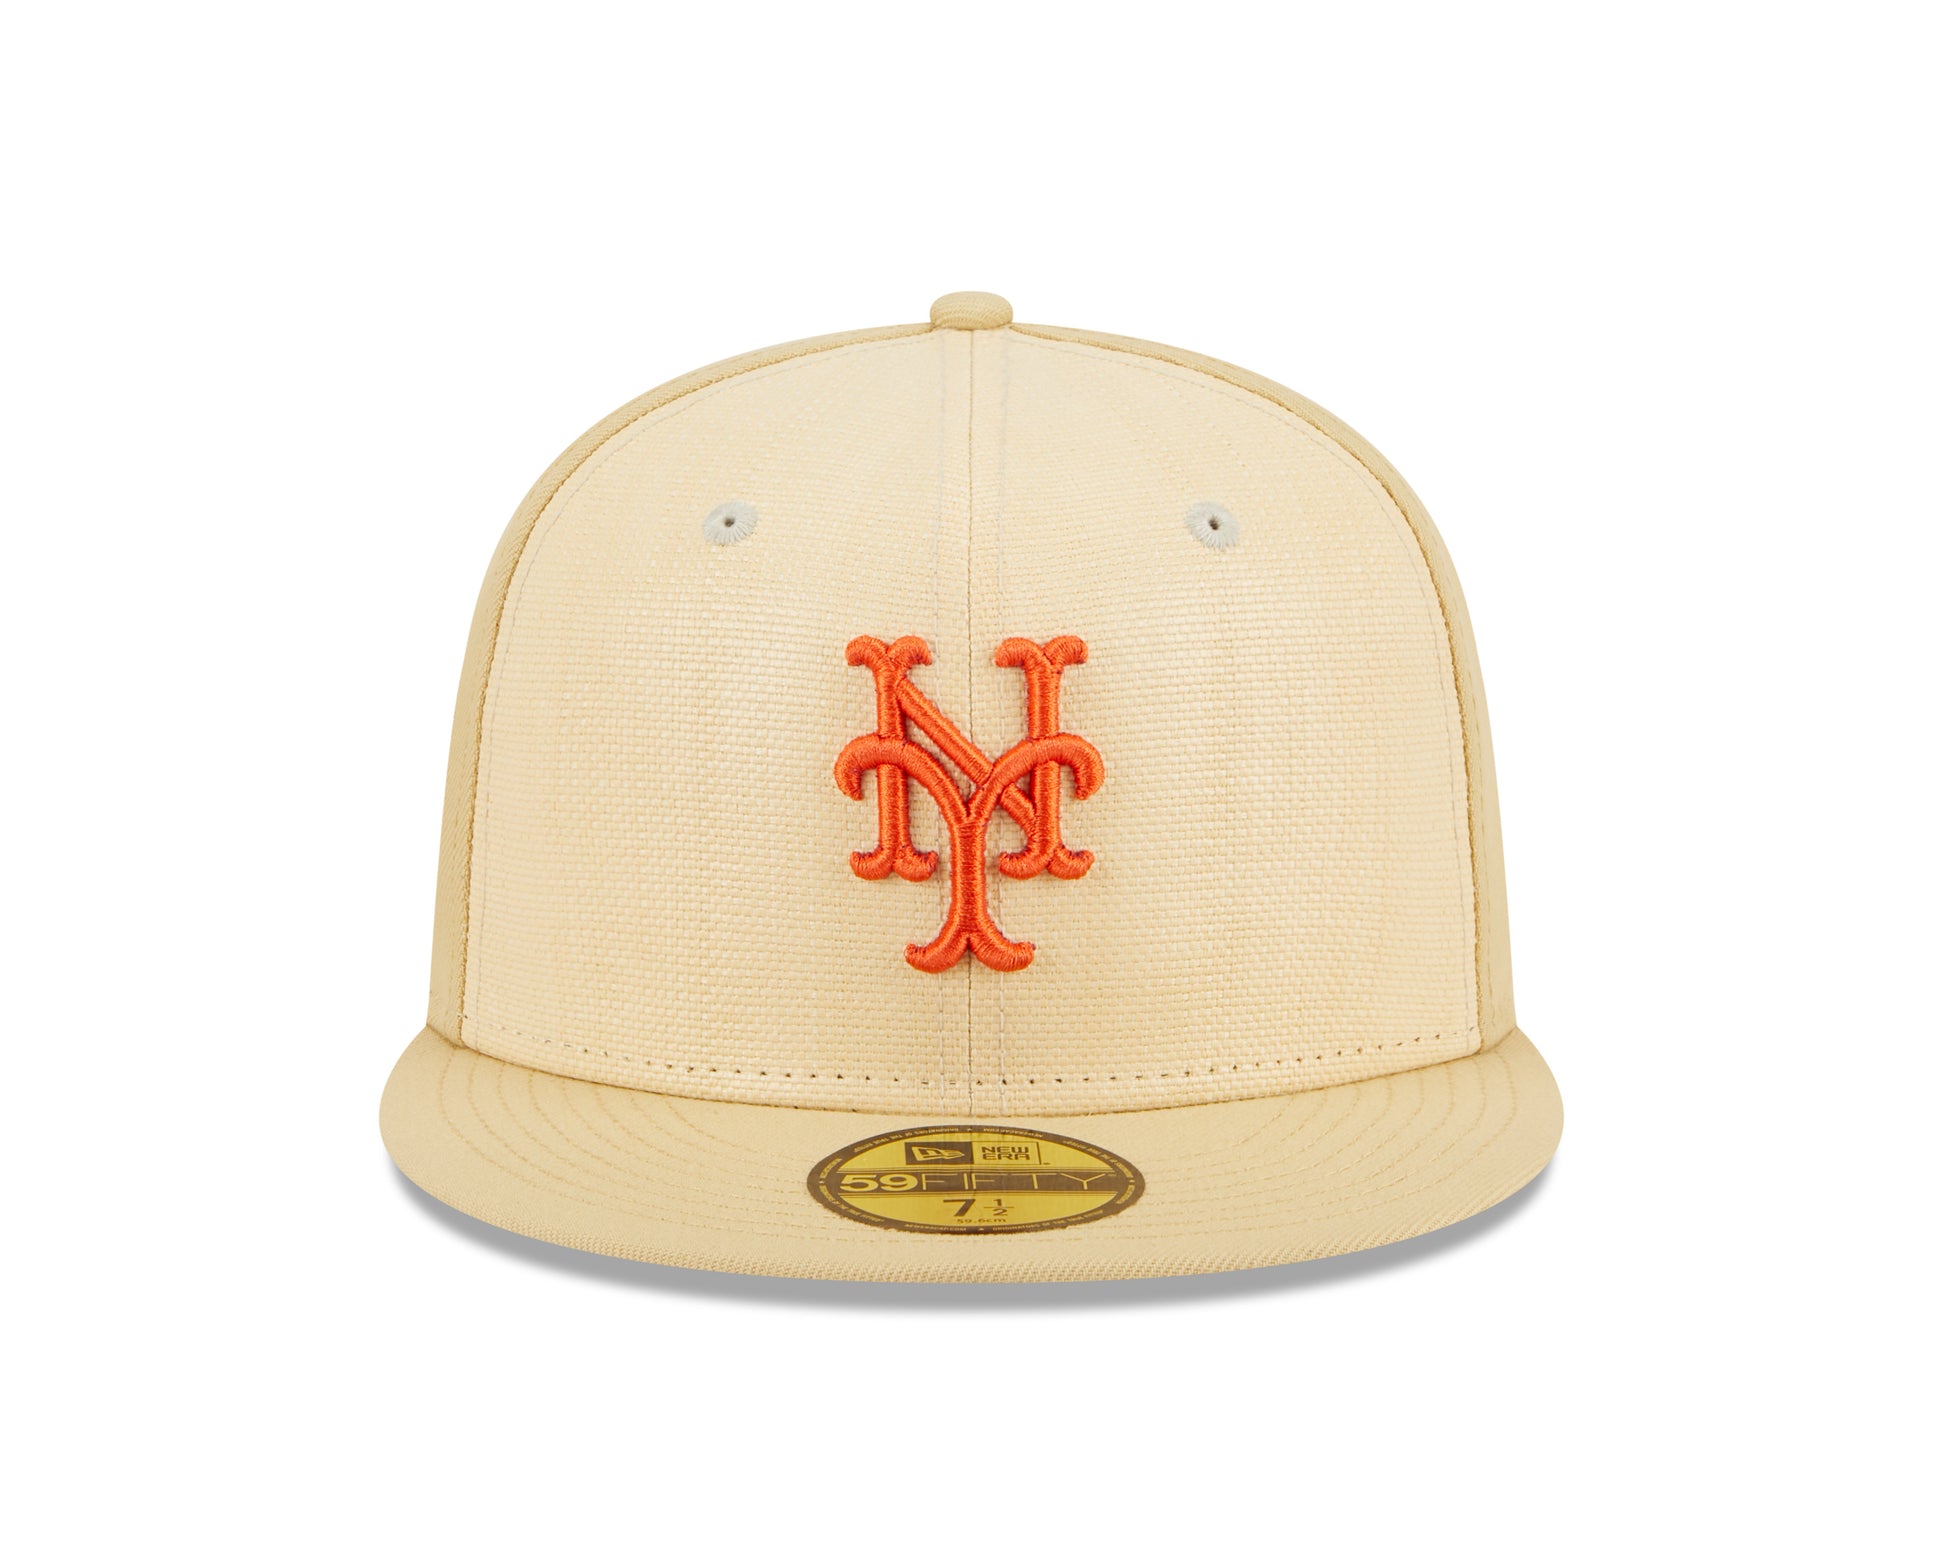 New Era - 59Fifty Fitted Cap - RAFFIA FRONT - New York Mets - Sand - Headz Up 